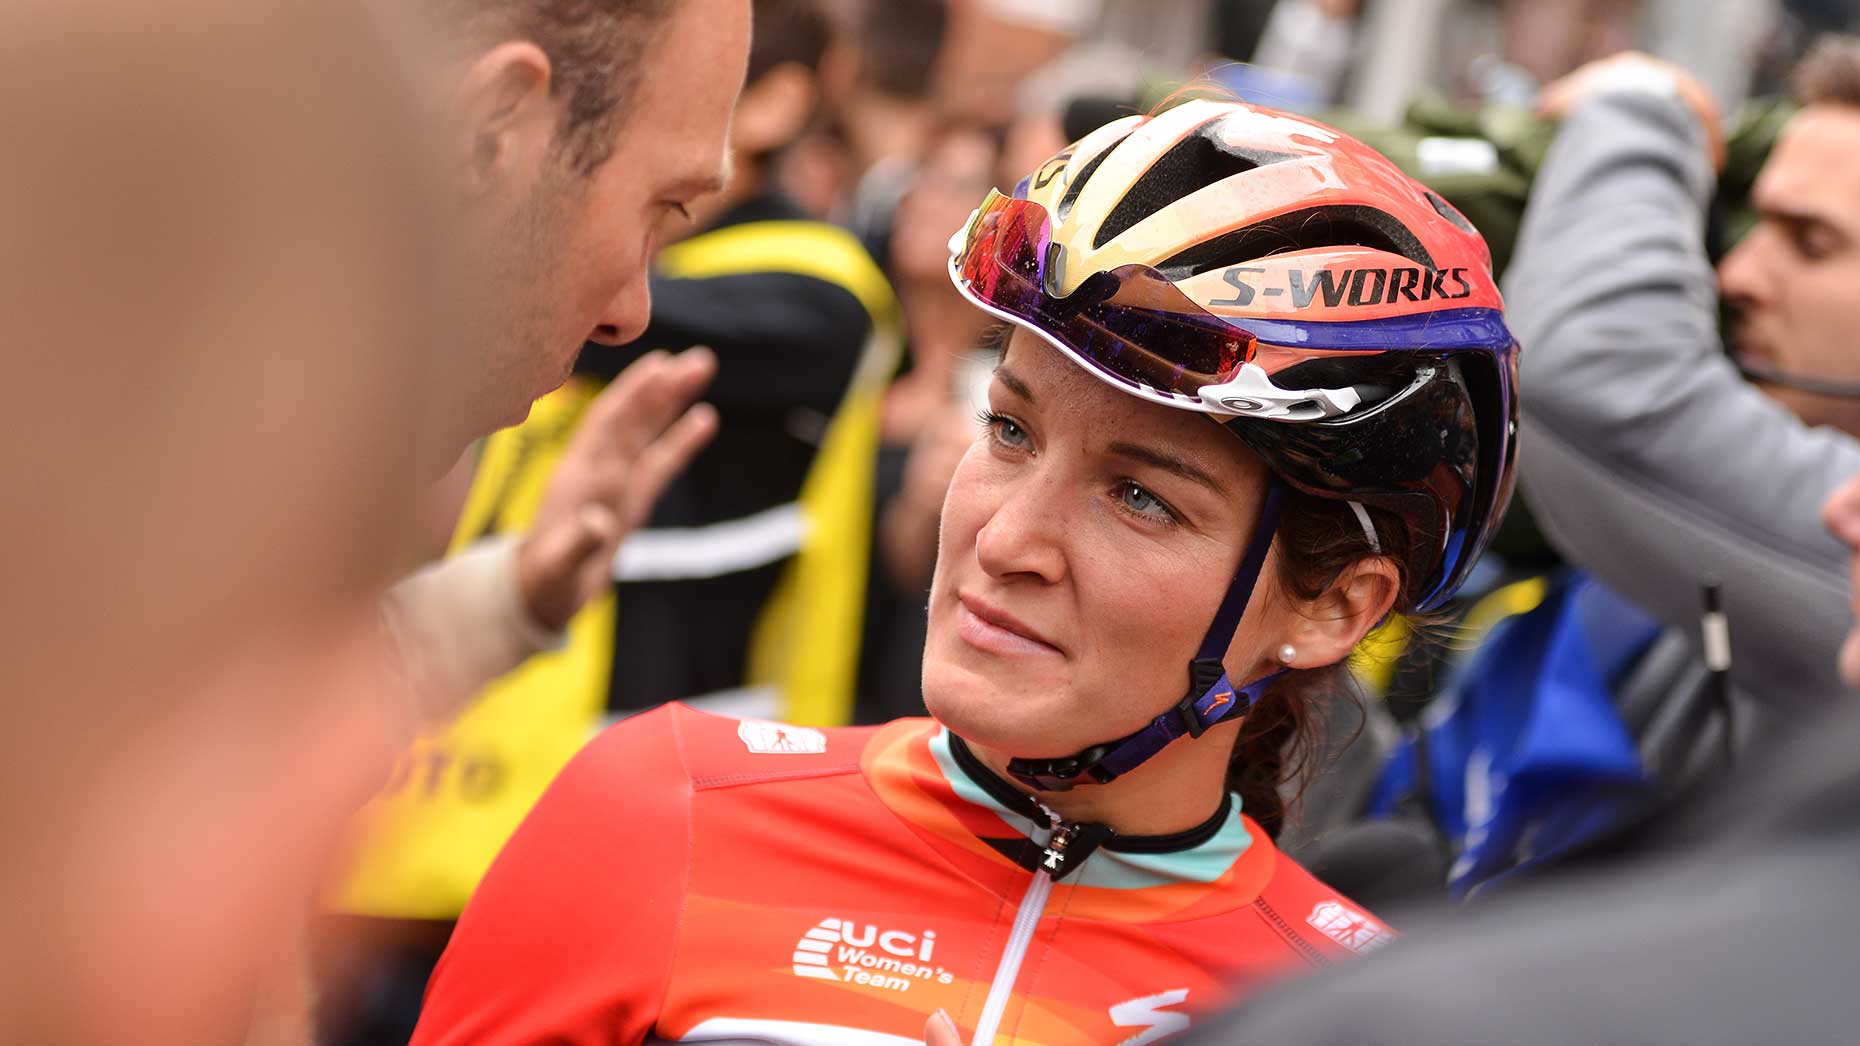 Lizzie Armistead. Photo: Steve Smailes for The Lincolnite